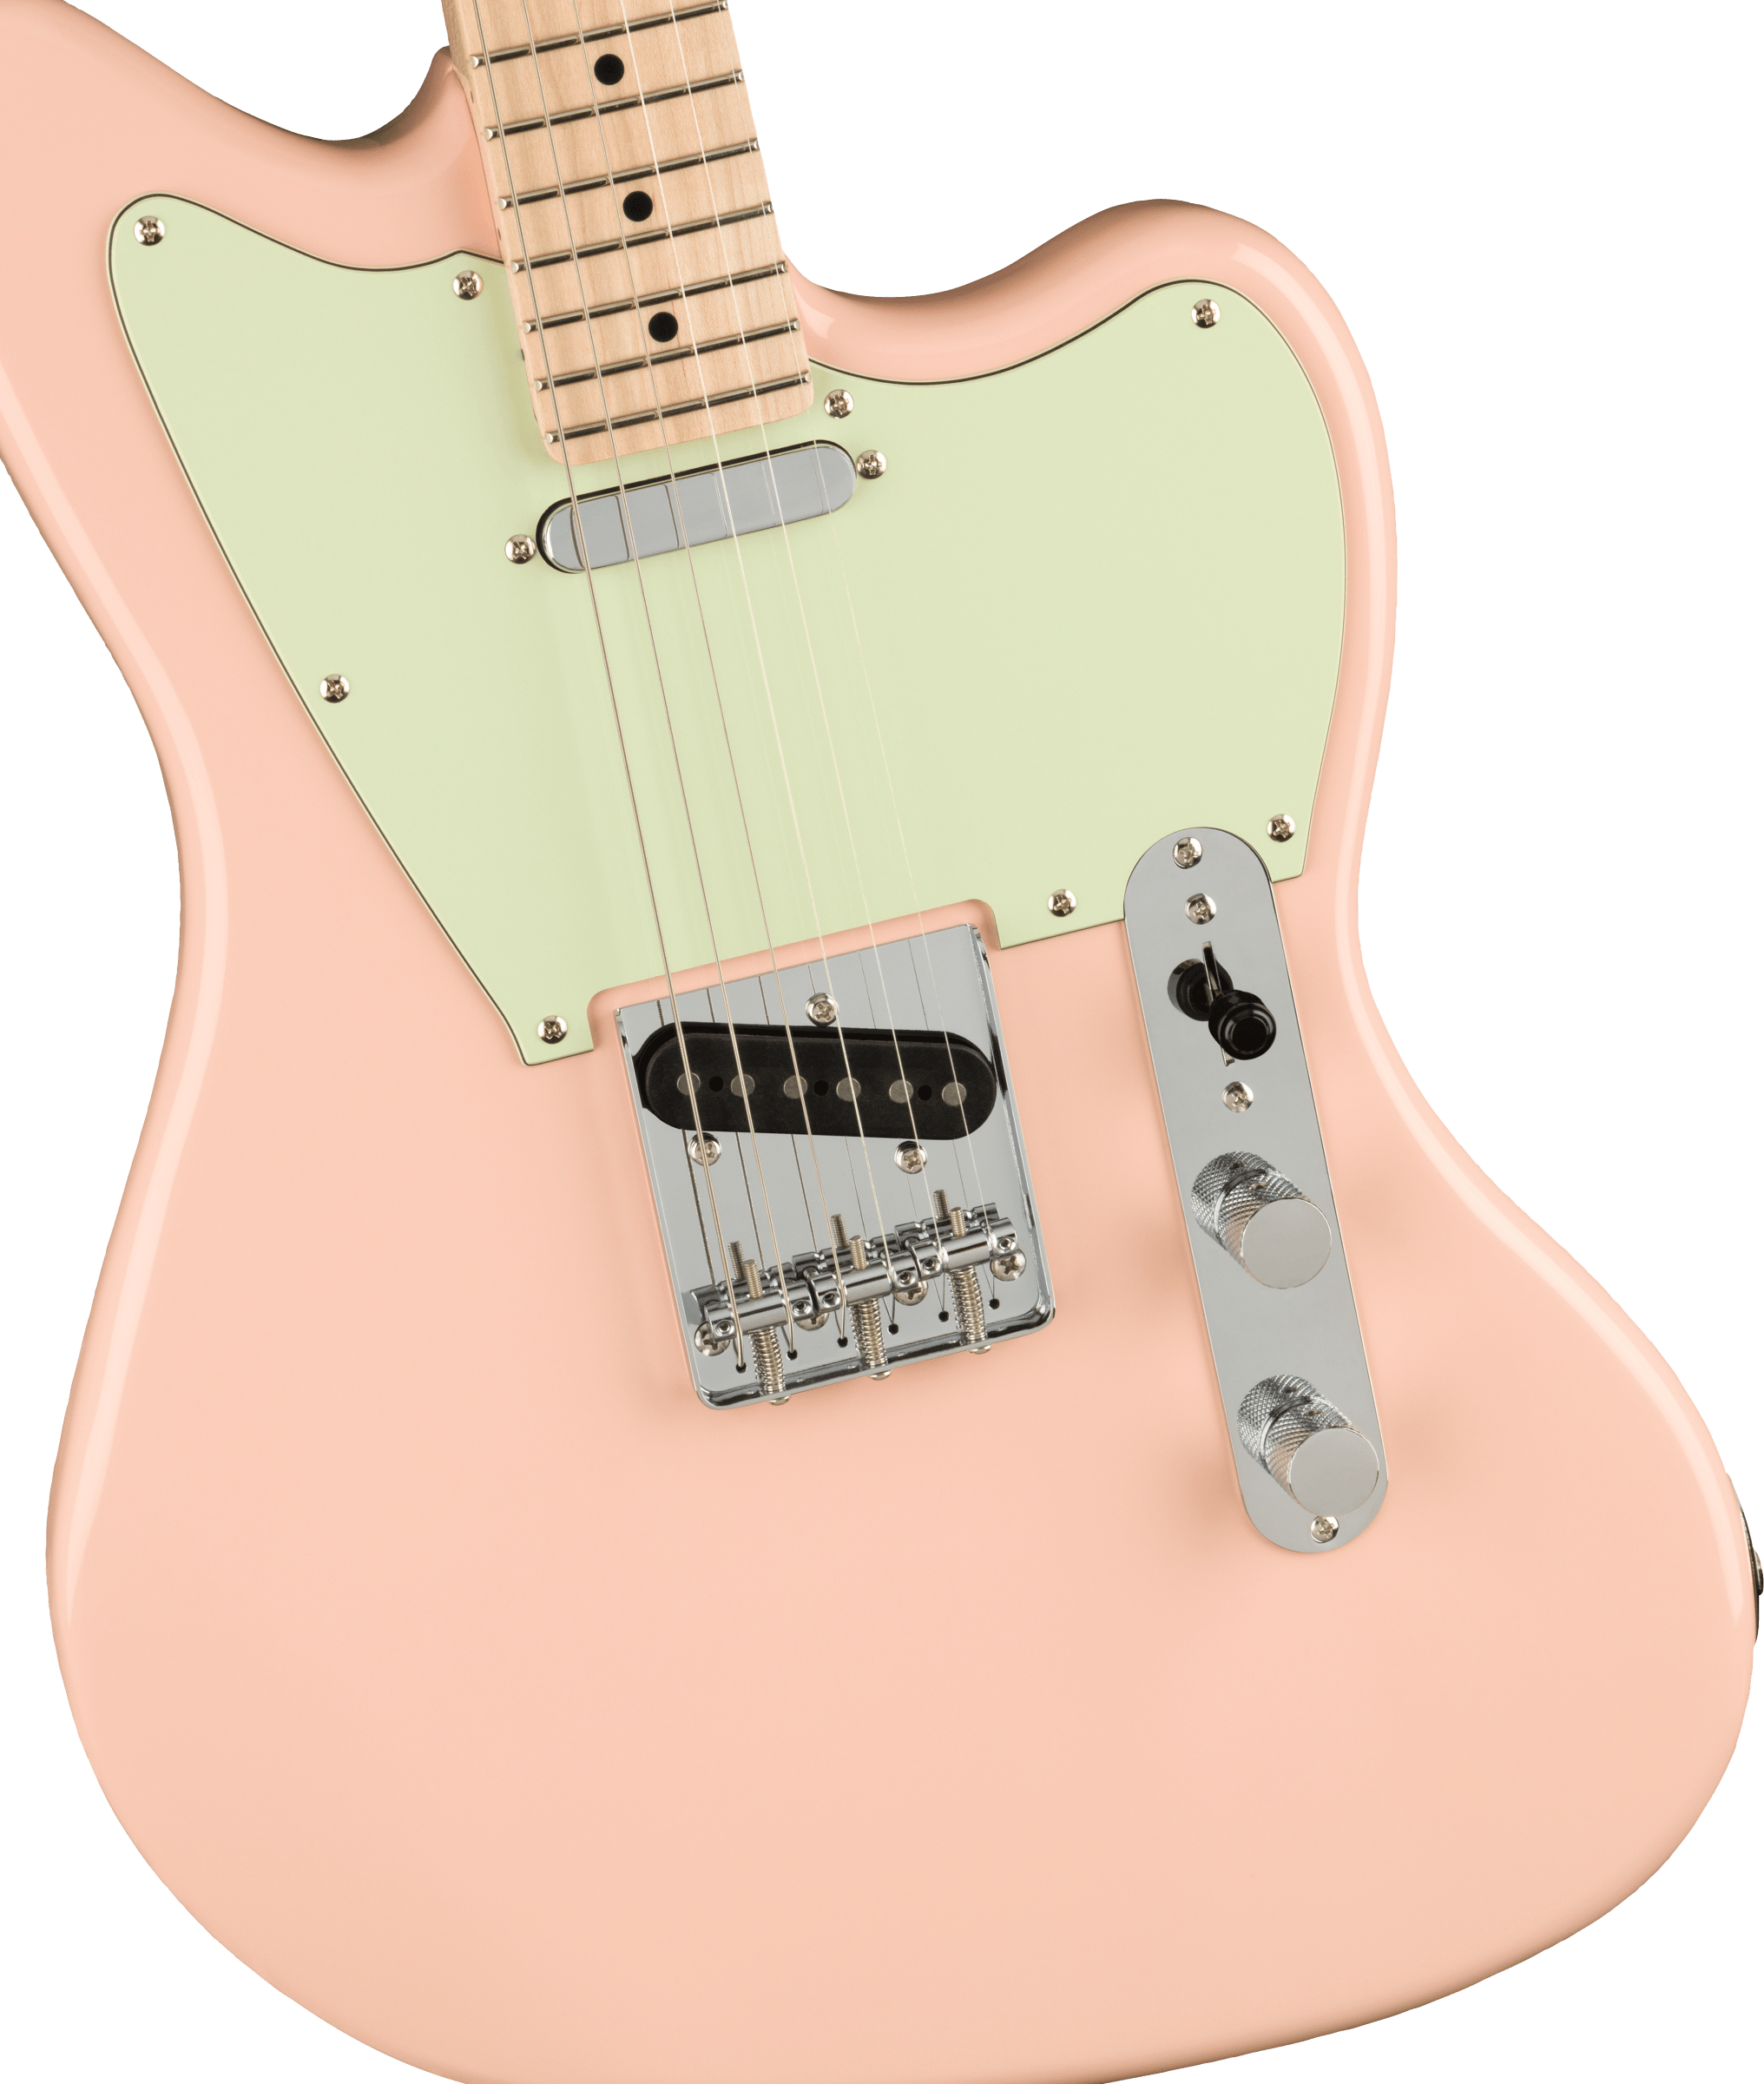 Fender Squier Paranormal Offset Telecaster Maple FB Mint Pickguard, Shell Pink